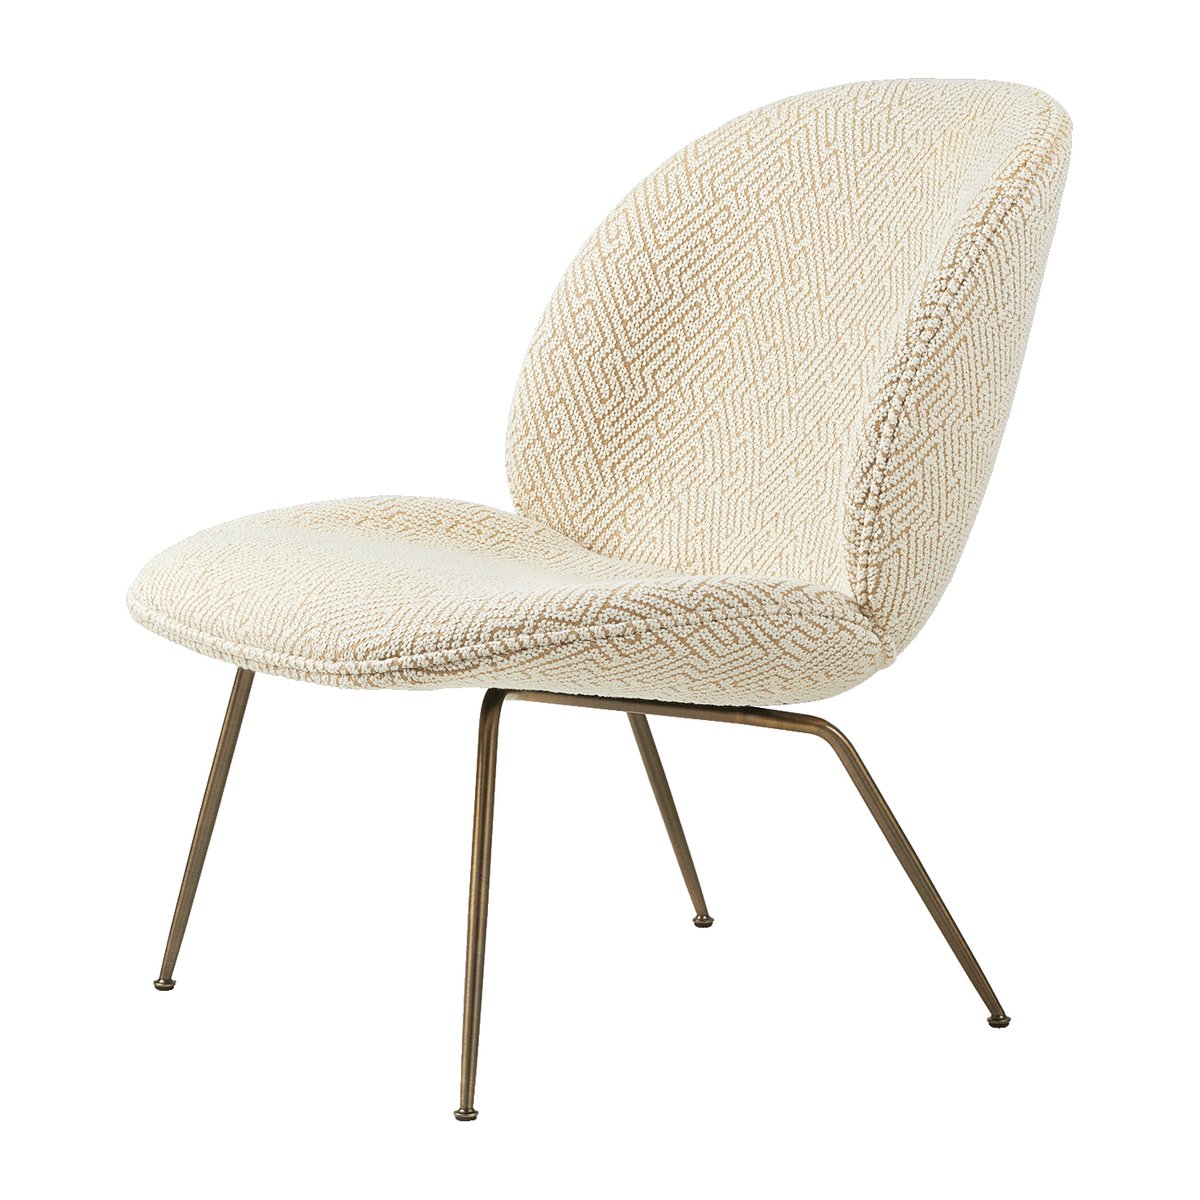 Gubi Beetle lounge chair fully upholstered conic base Dora boucle 0002-antique brass